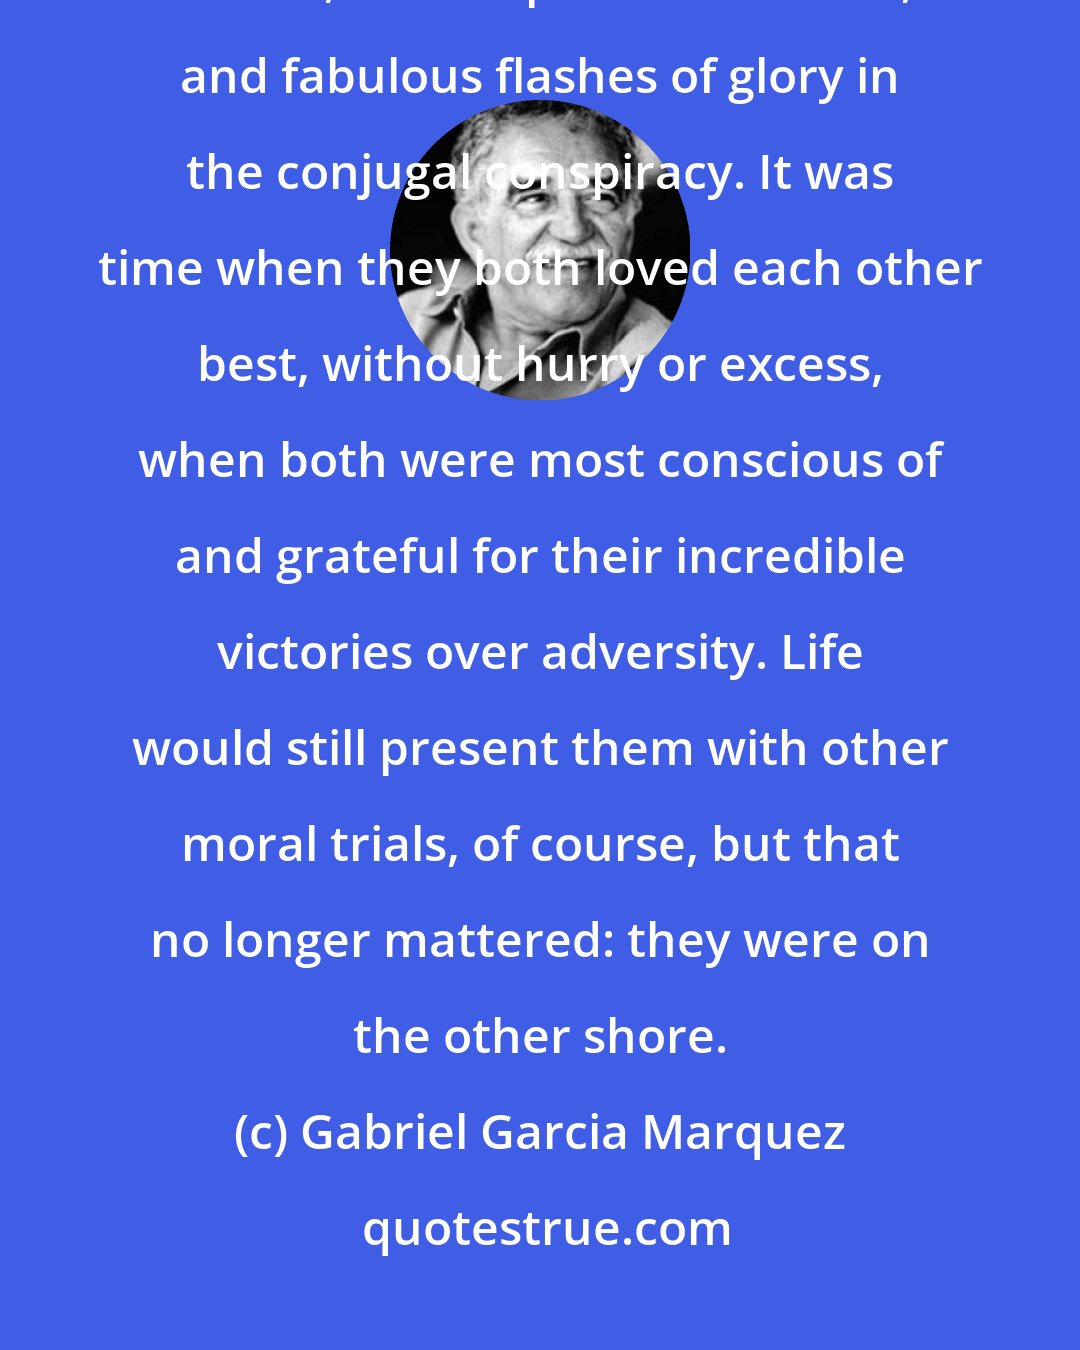 Gabriel Garcia Marquez: Together they had overcome the daily incomprehension, the instantaneous hatred, the reciprocal nastiness, and fabulous flashes of glory in the conjugal conspiracy. It was time when they both loved each other best, without hurry or excess, when both were most conscious of and grateful for their incredible victories over adversity. Life would still present them with other moral trials, of course, but that no longer mattered: they were on the other shore.